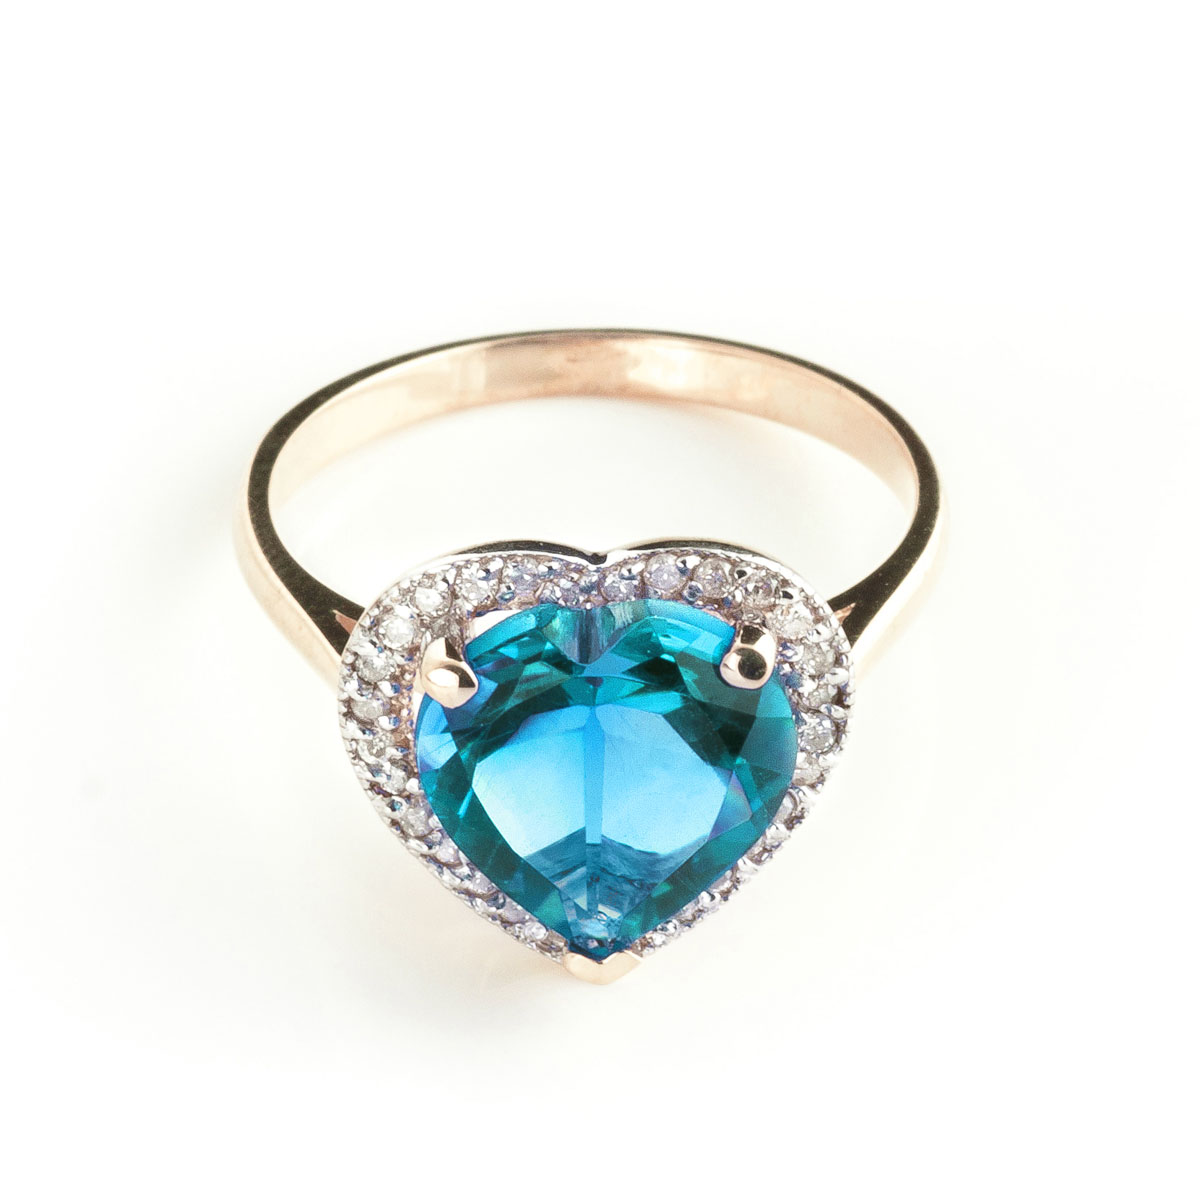 Blue Topaz Halo Ring 6.44 ctw in 18ct Rose Gold